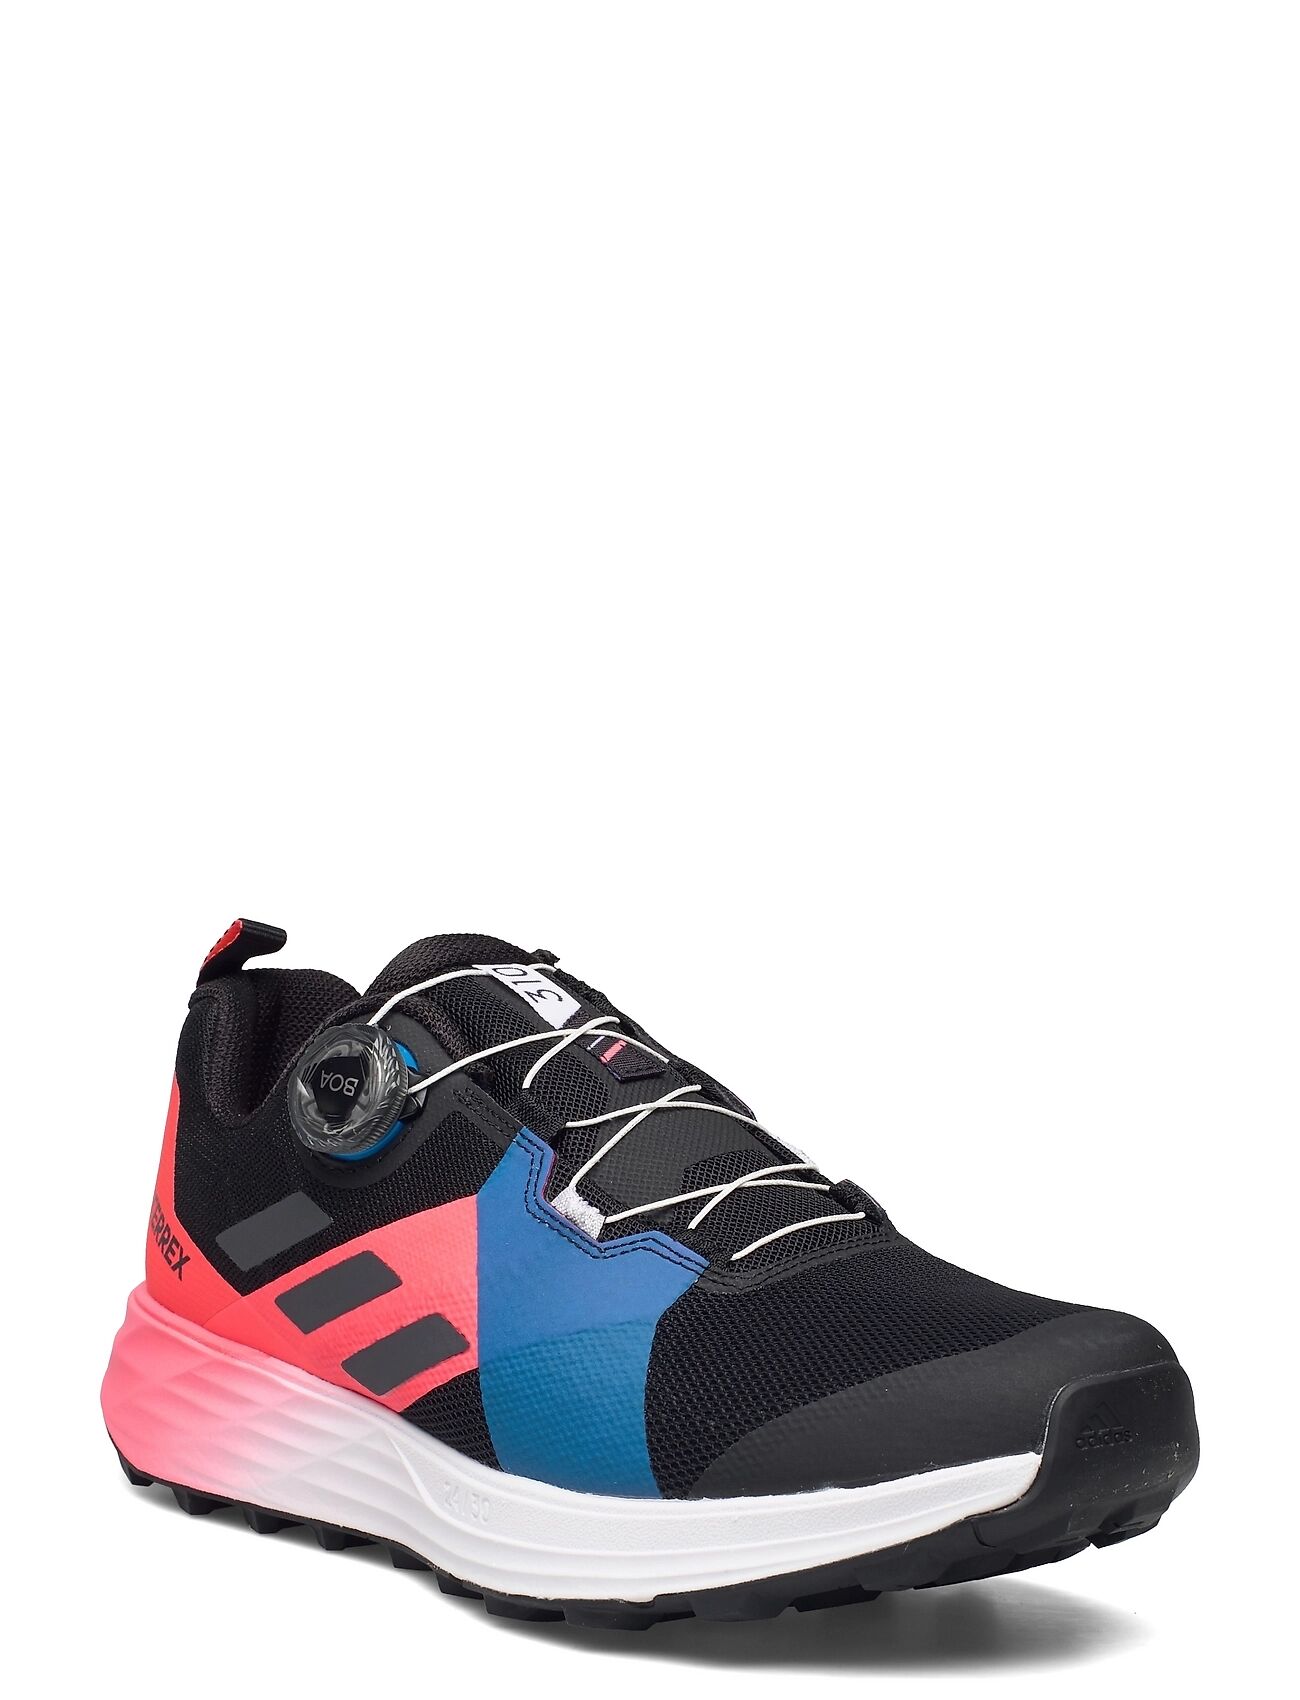 adidas Performance Terrex Two Boa® Trail Running Shoes Sport Shoes Running Shoes Multi/mønstret Adidas Performance